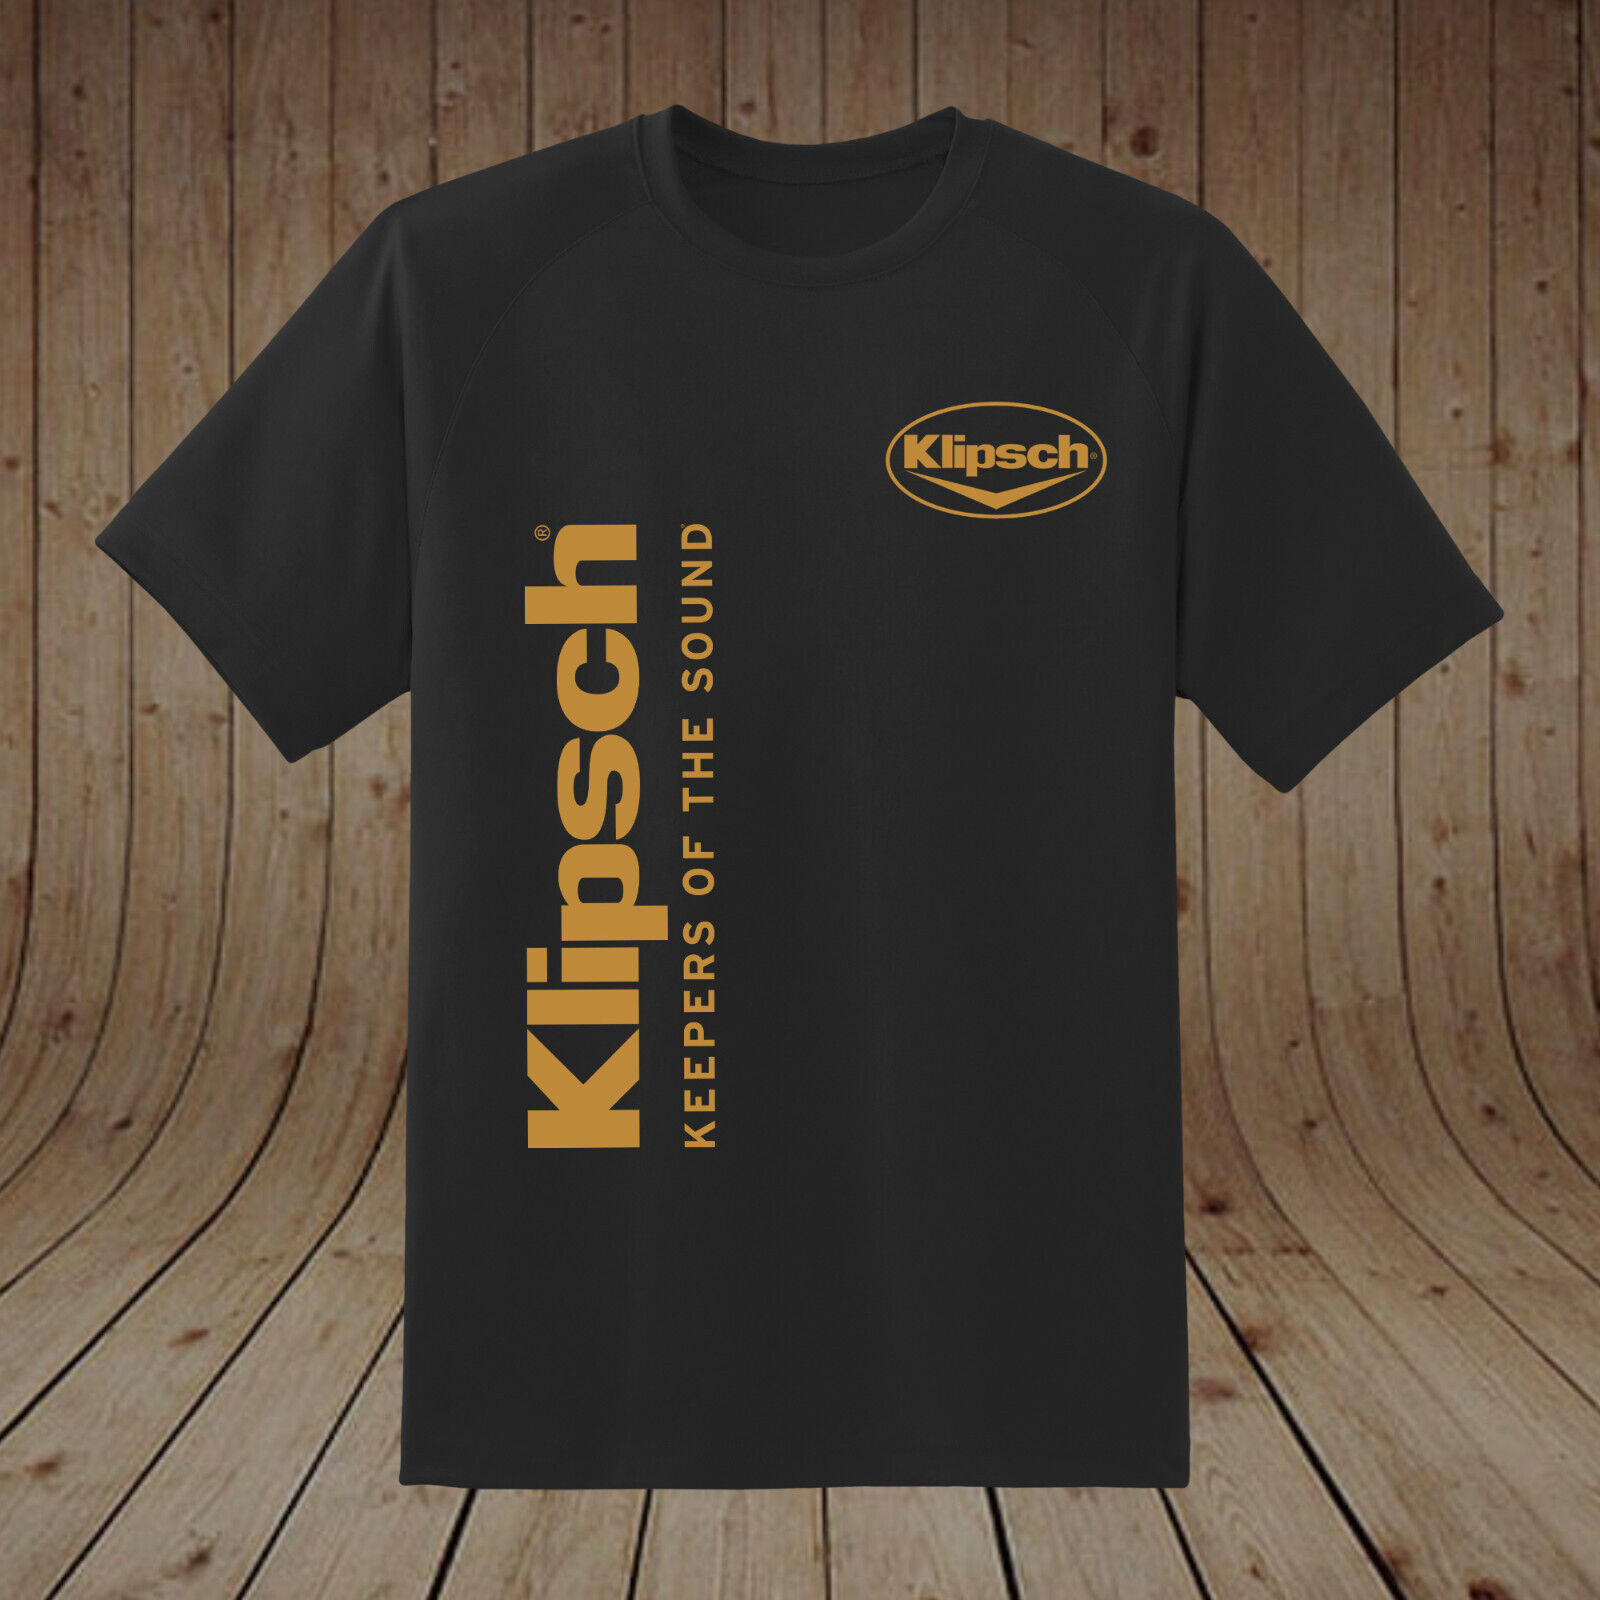 Hot New Klipsch Keepers Of The Sound Side Logo T Shirt Size S - 5XL